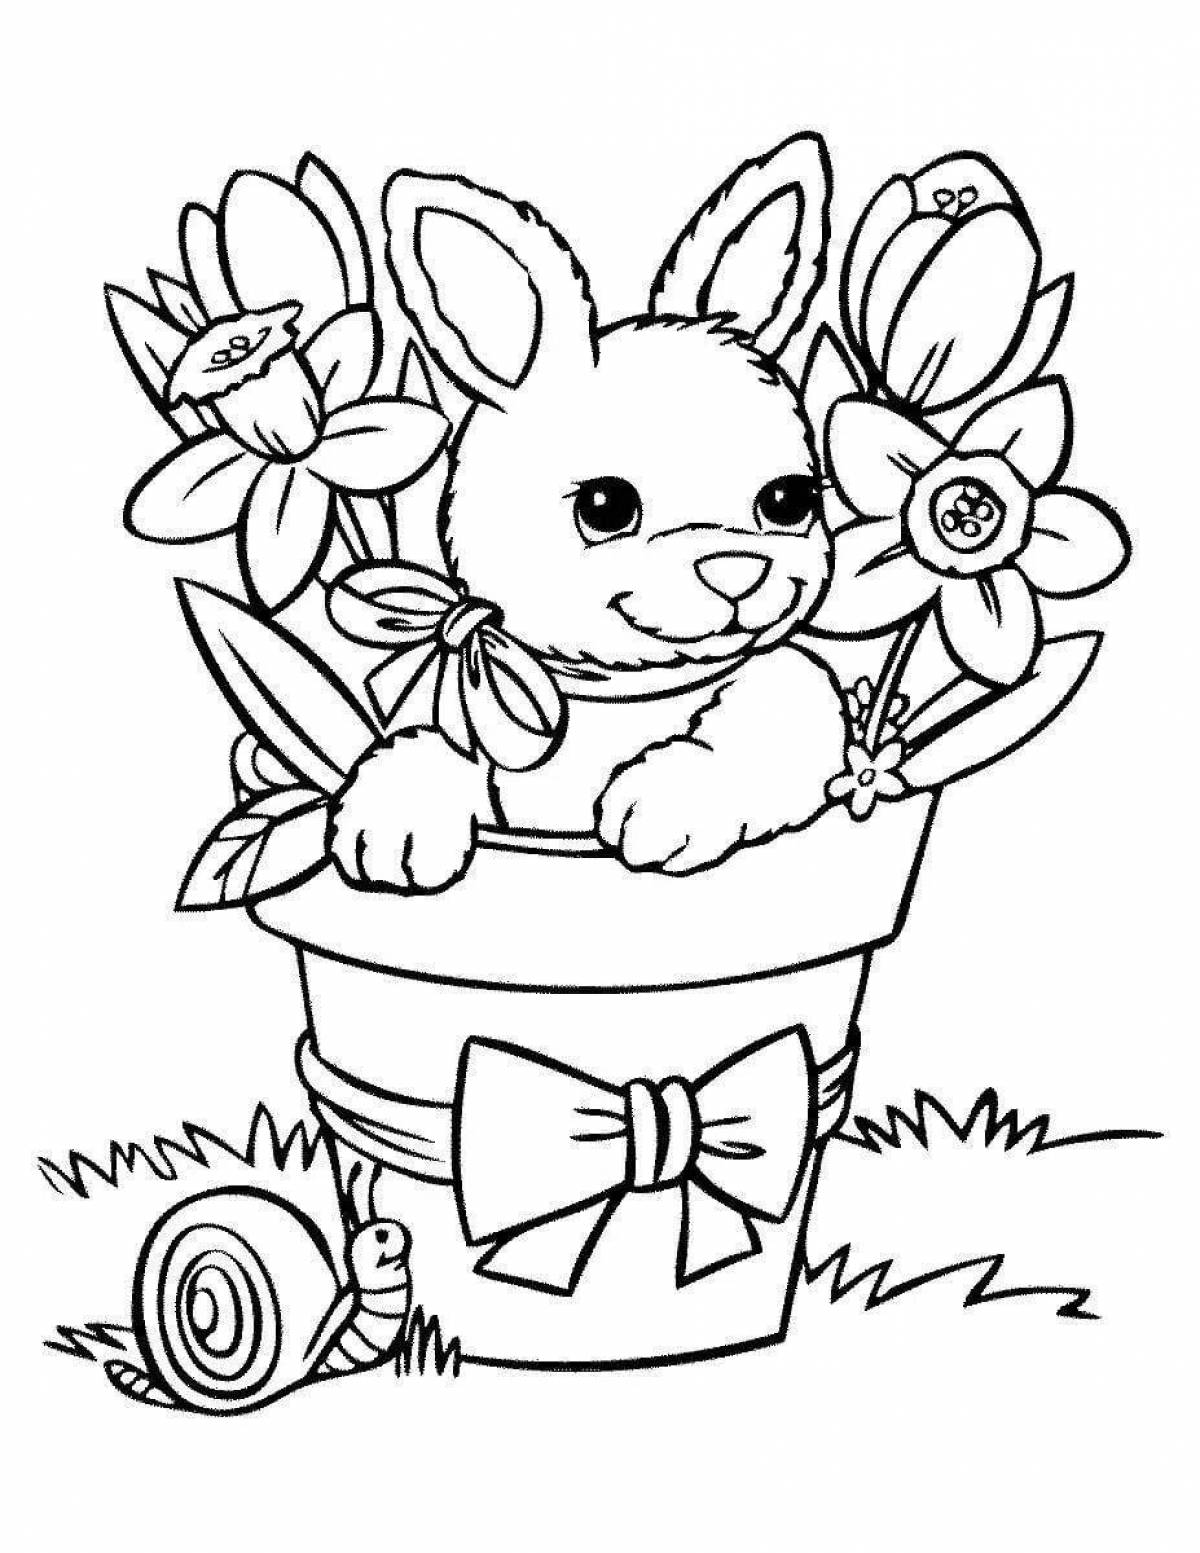 Blissful bunny girl coloring page